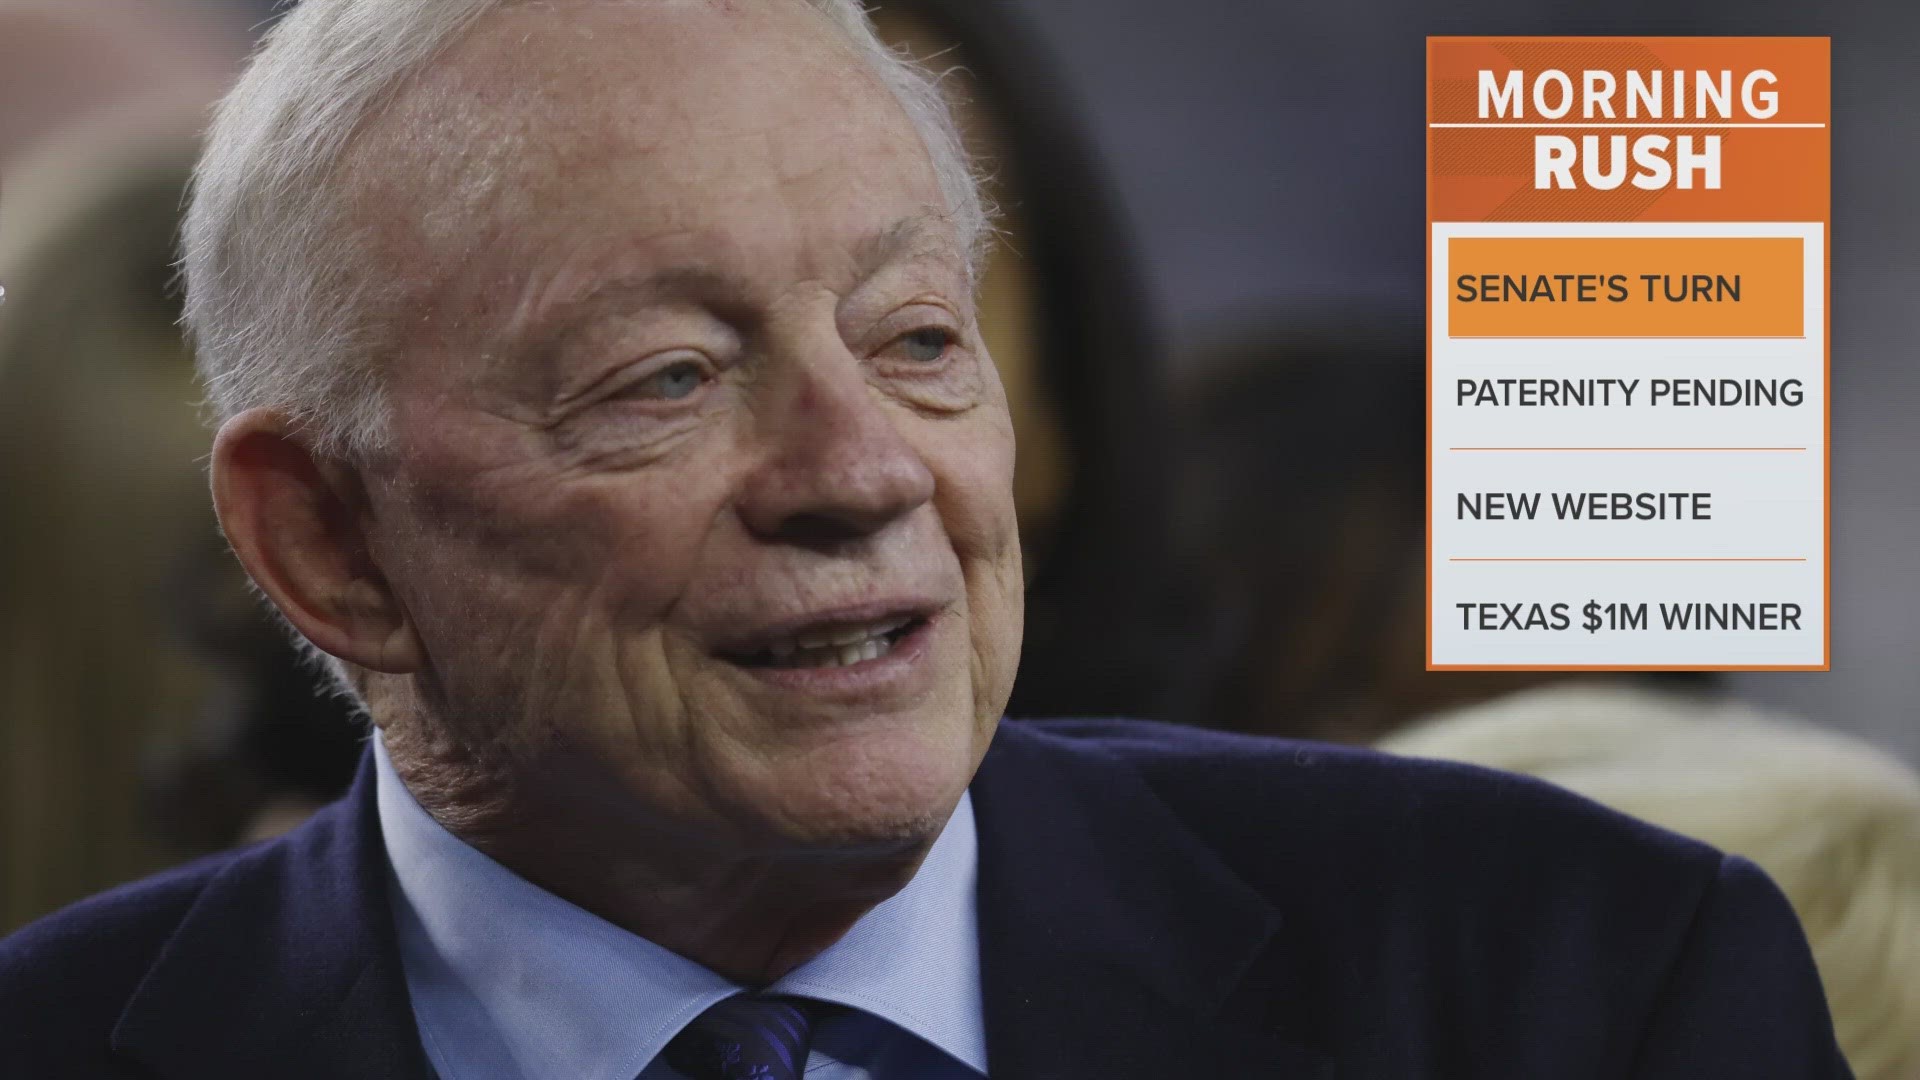 The Dallas Cowboys owner is still ordered to take a paternity test.